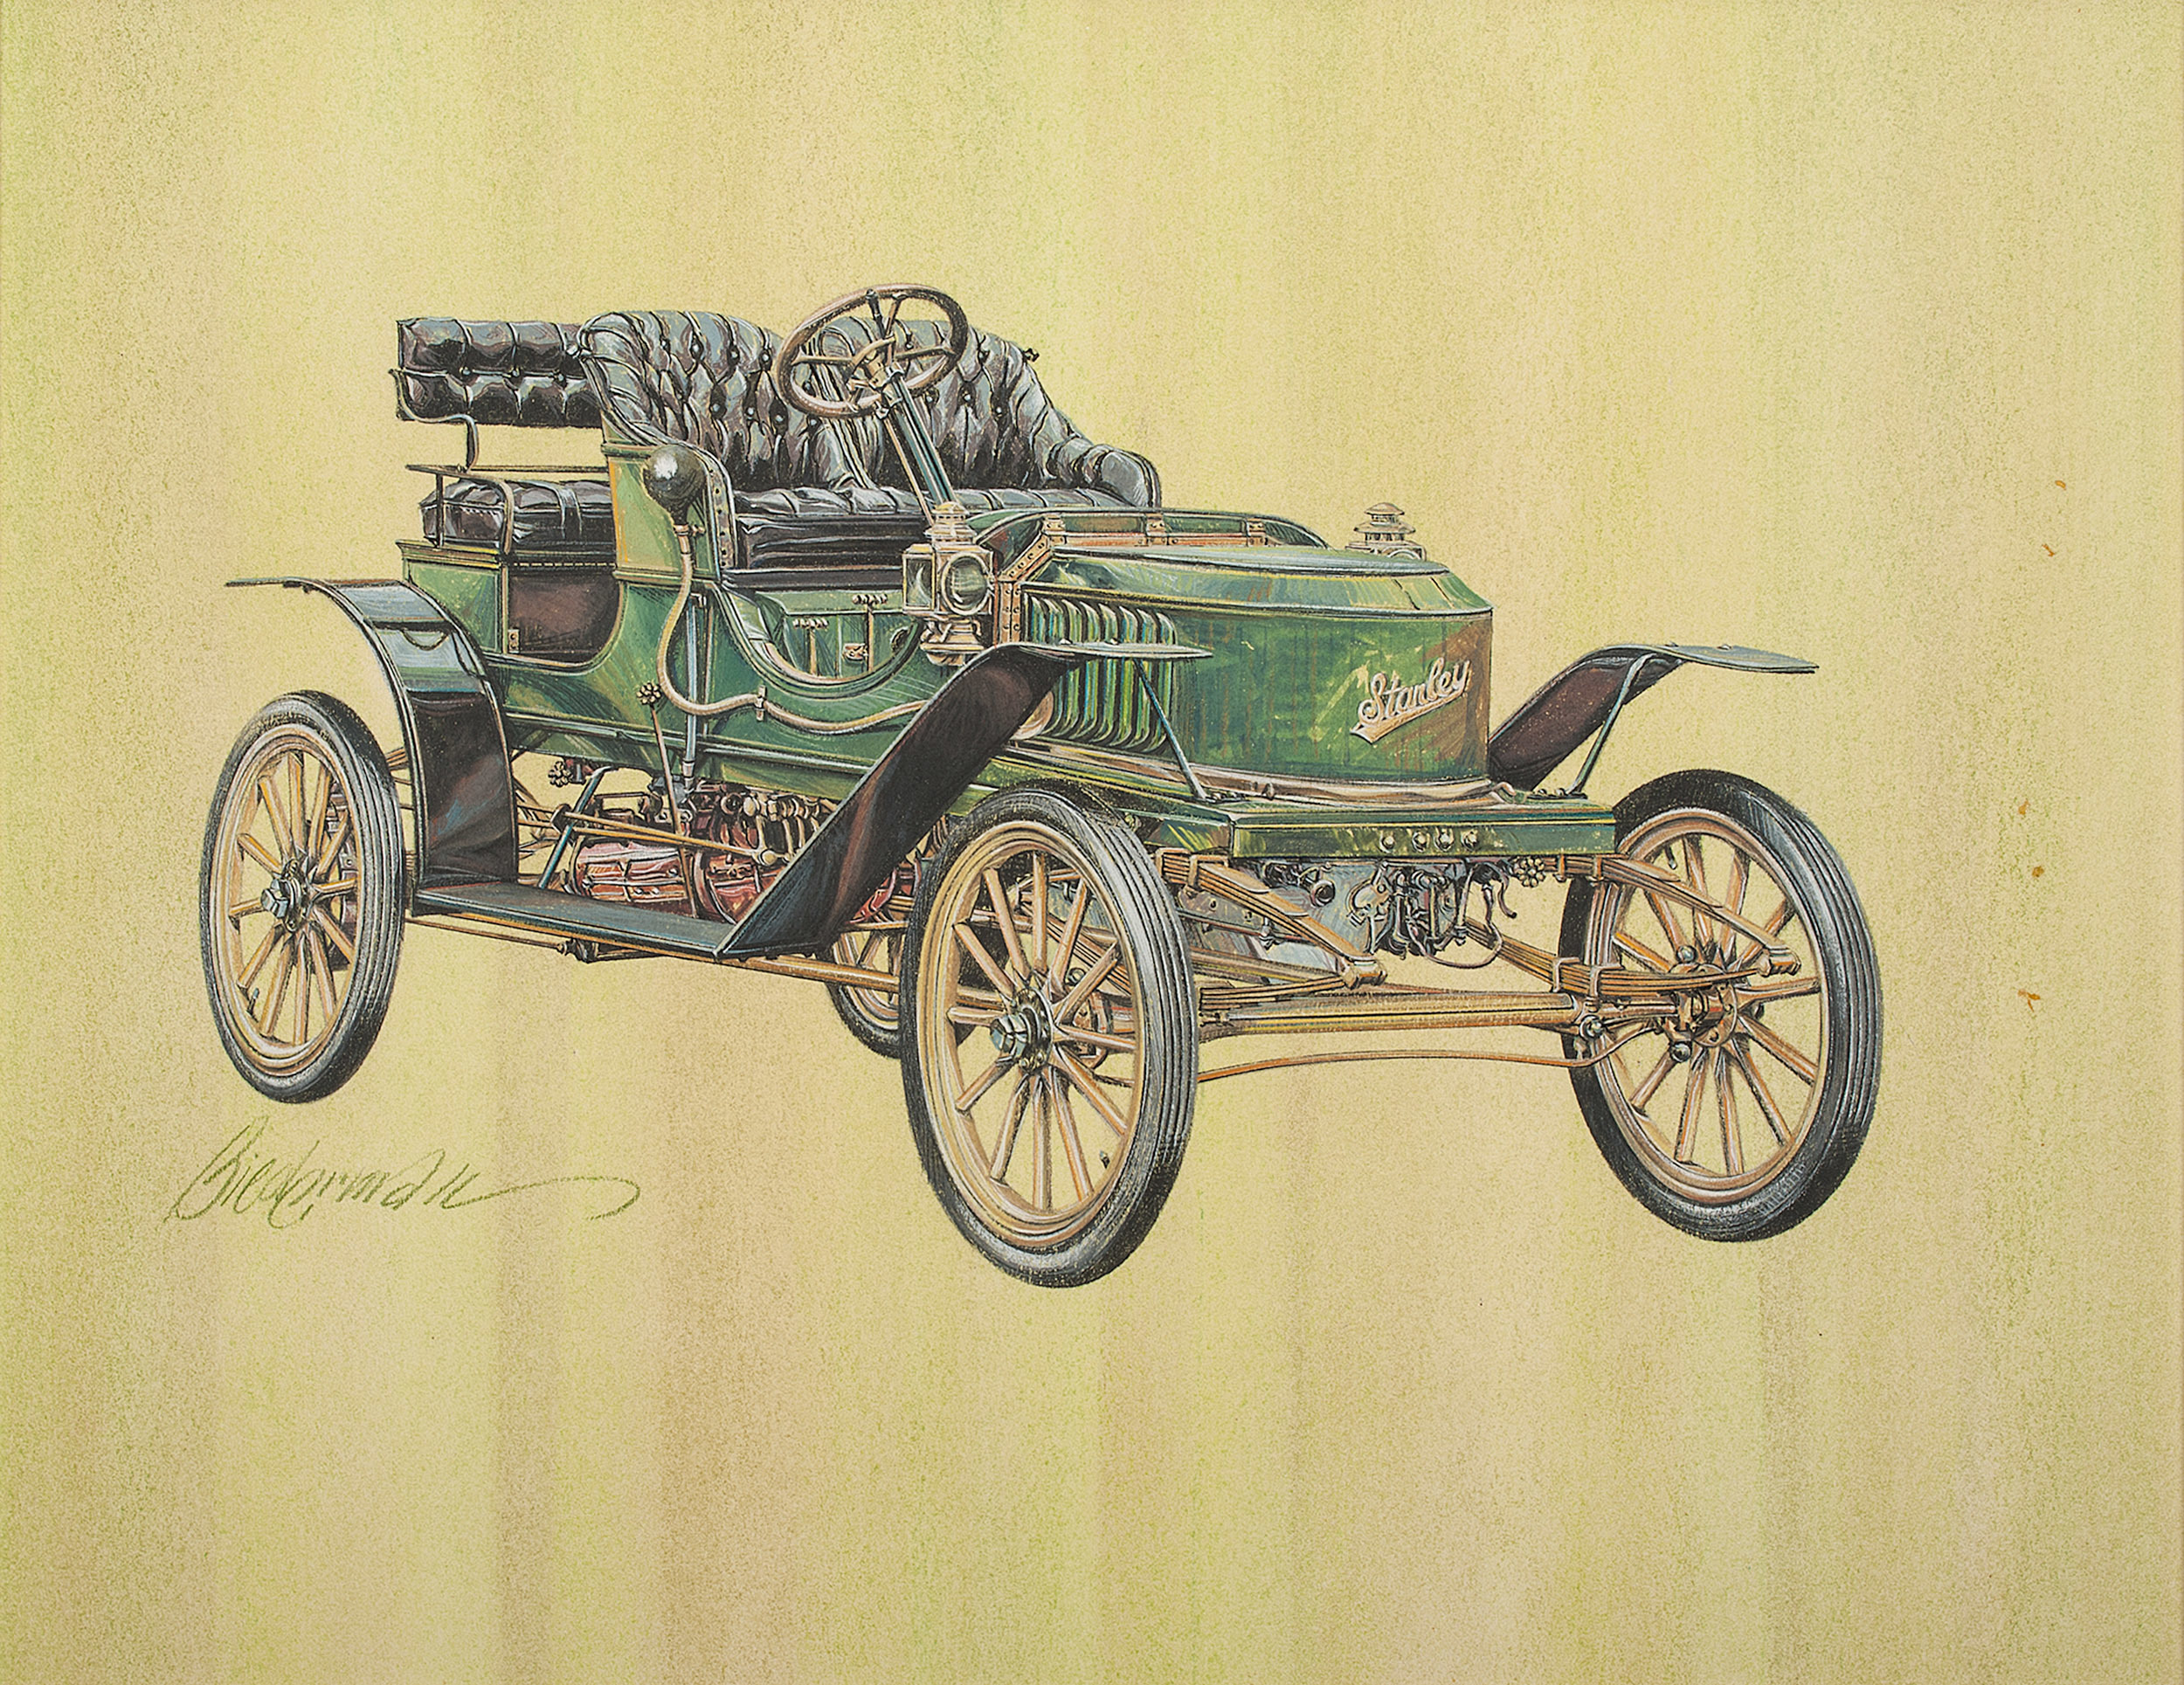 1909 Stanley E-2 Runabout: Illustrated by Jerome D. Biederman